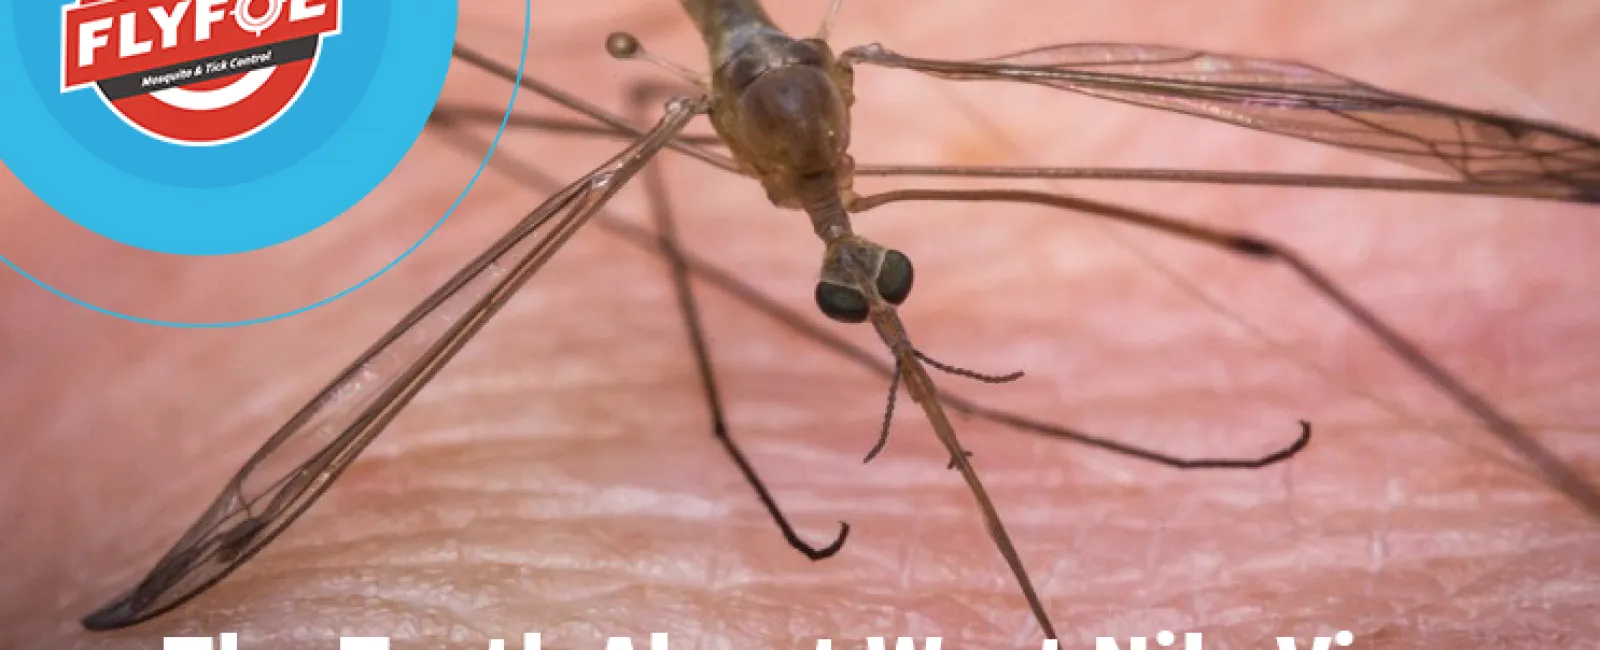 a close-up of a mosquito